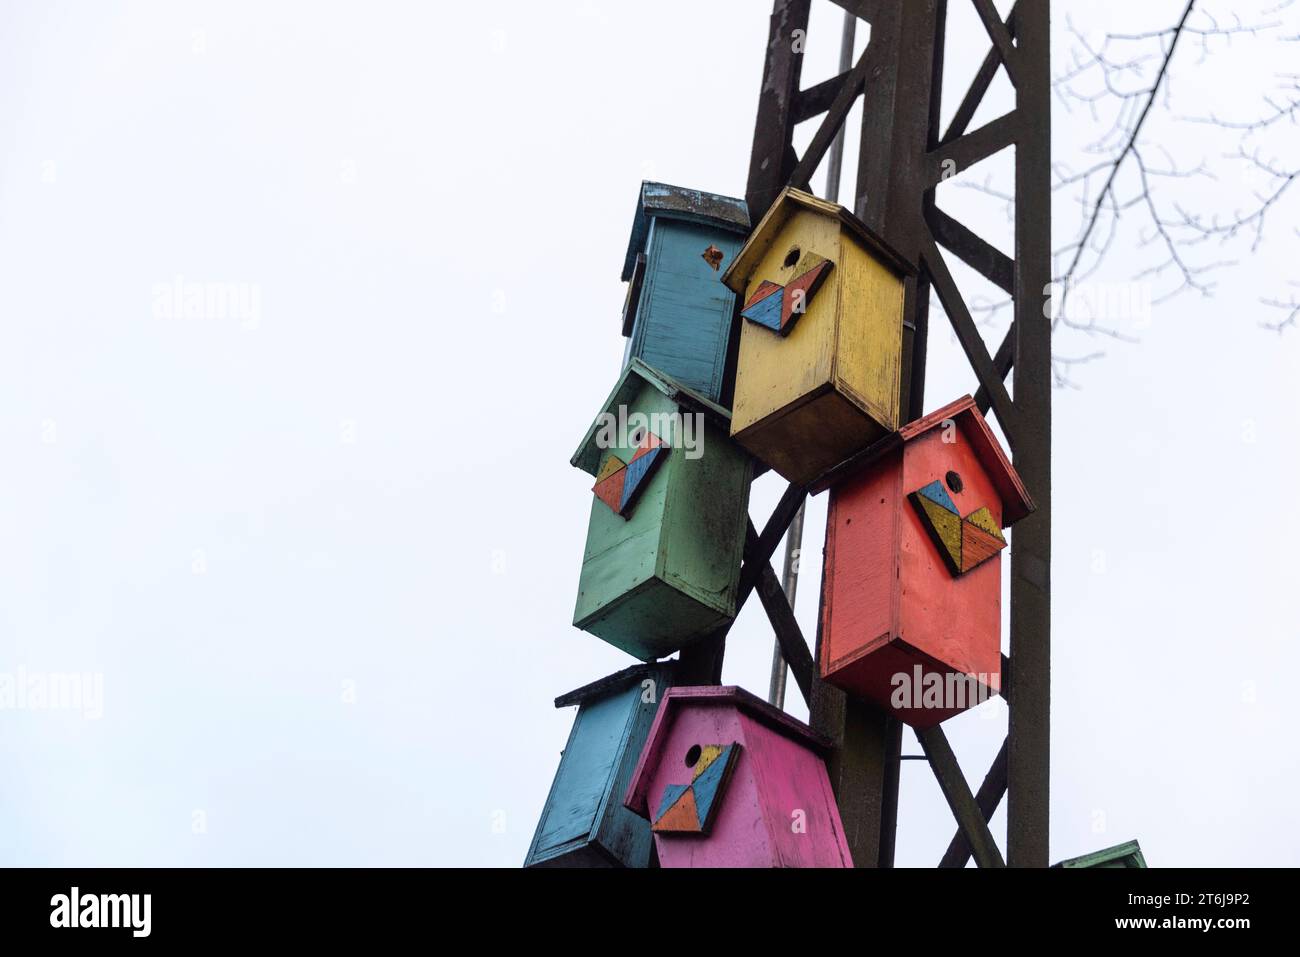 Birdhouses hanging from an old electricity pole, Copenhagen, Denmark Stock Photo